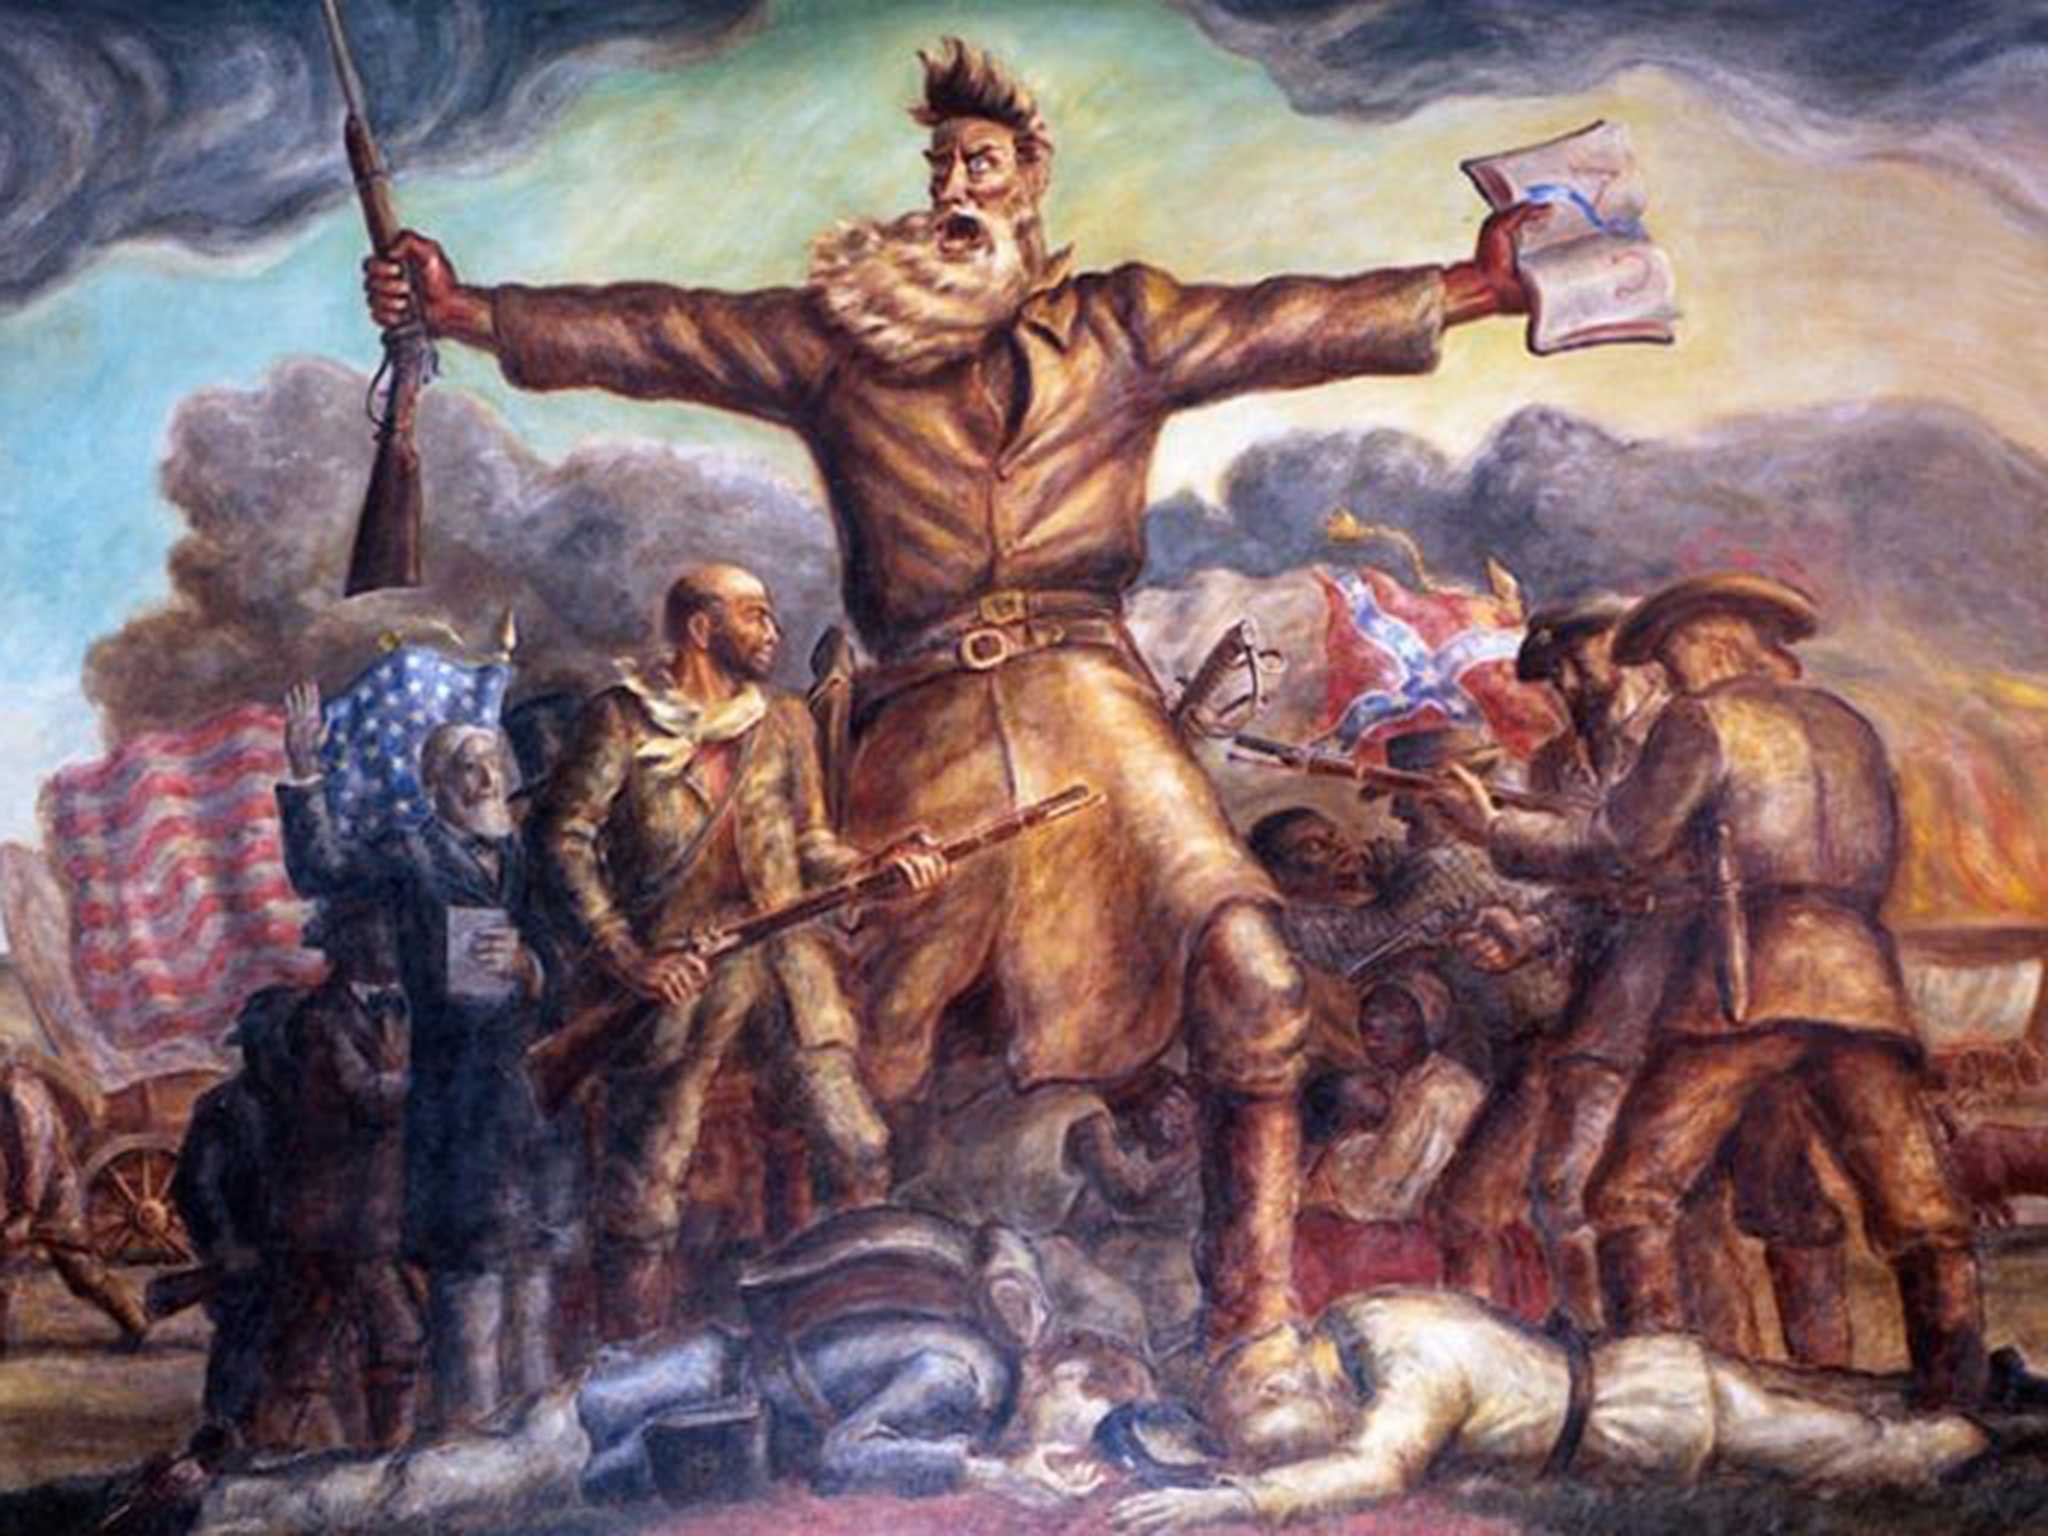 Radical stand: John Brown, as portrayed by John Steuart Curry, believed in fighting for slaves’ rights